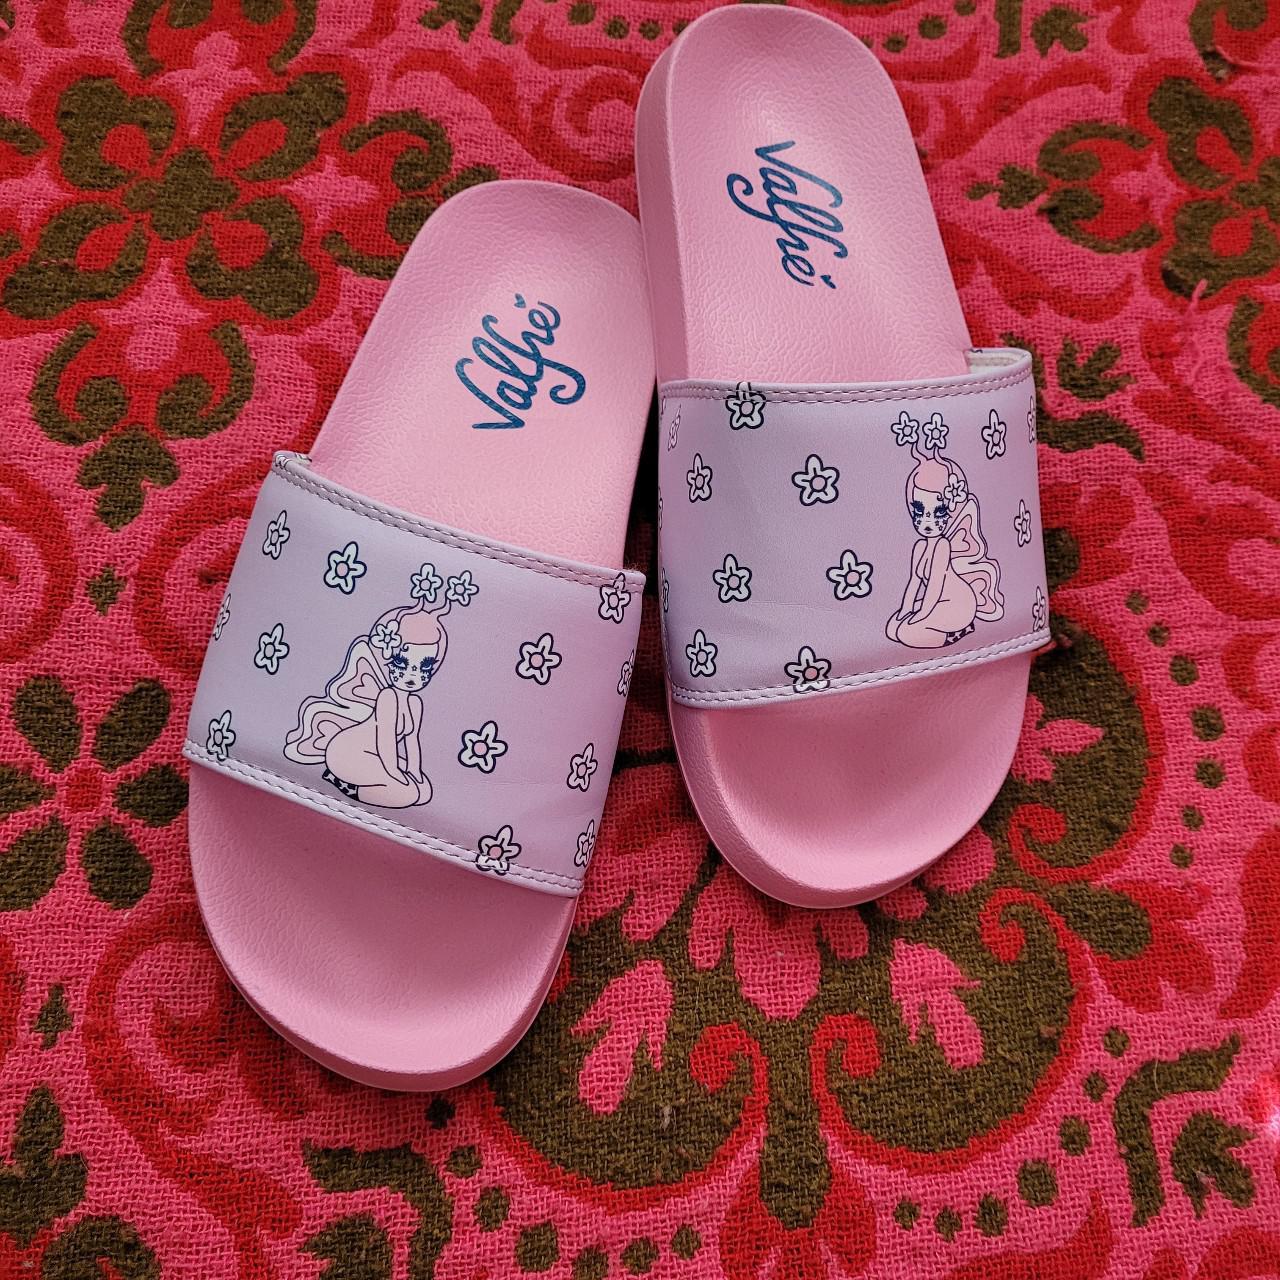 Product Image 1 - Valfre Pink Fairycore Slides. Cute